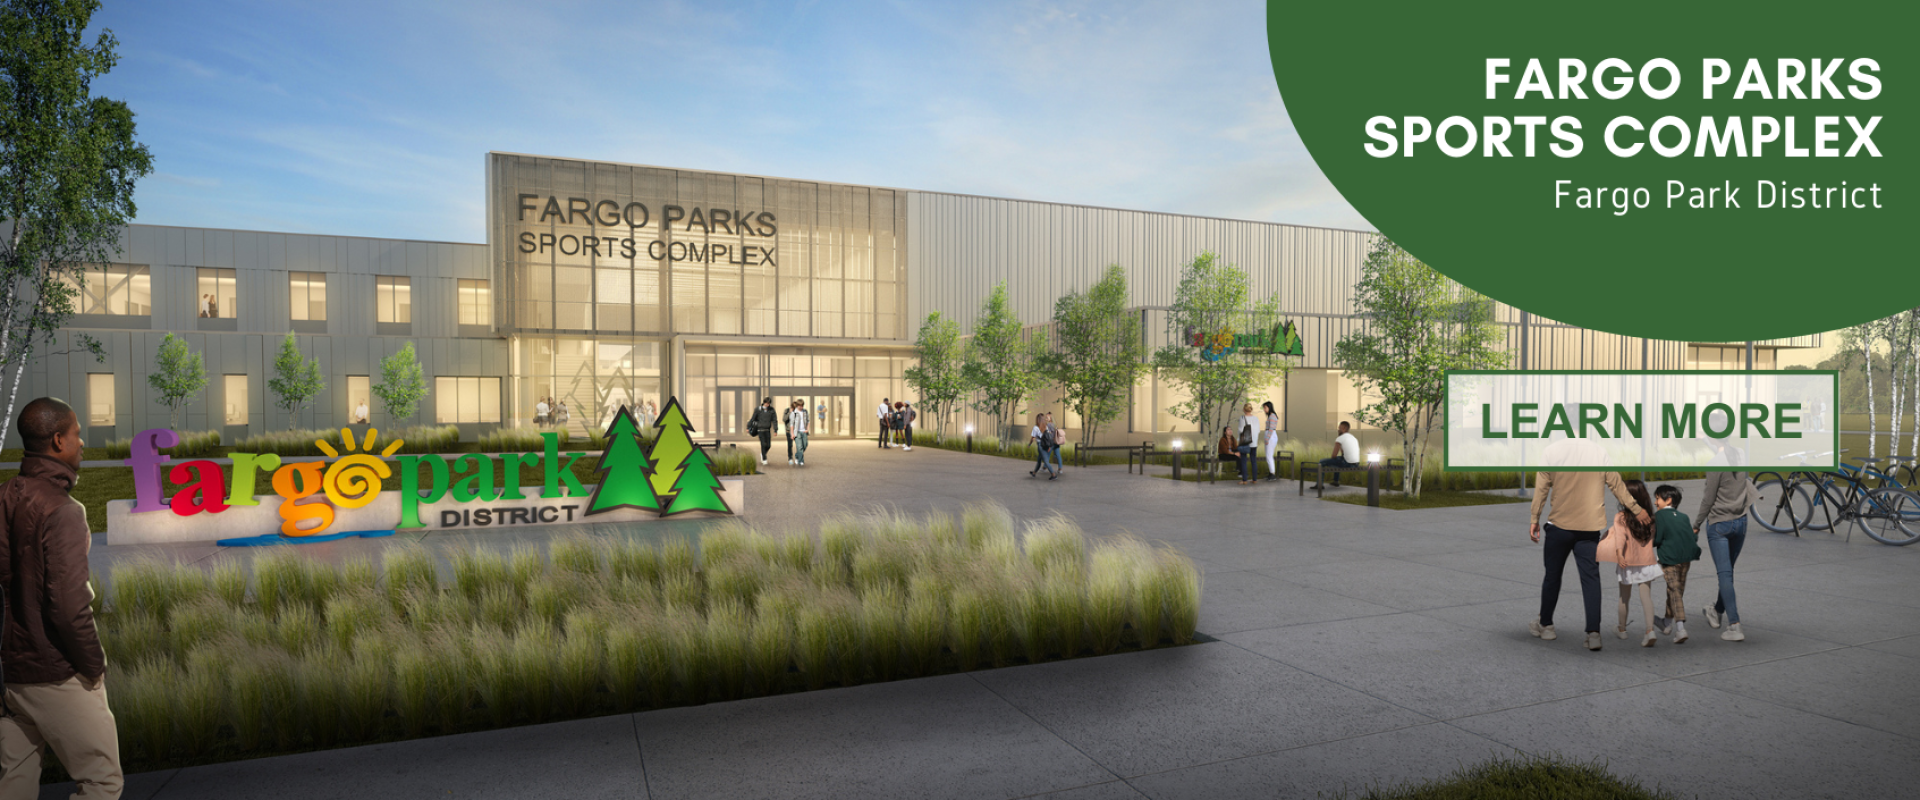 This photo shows a rendition of the Fargo Parks Sports Complex with text that says Fargo Parks Sports Complex Fargo Park District